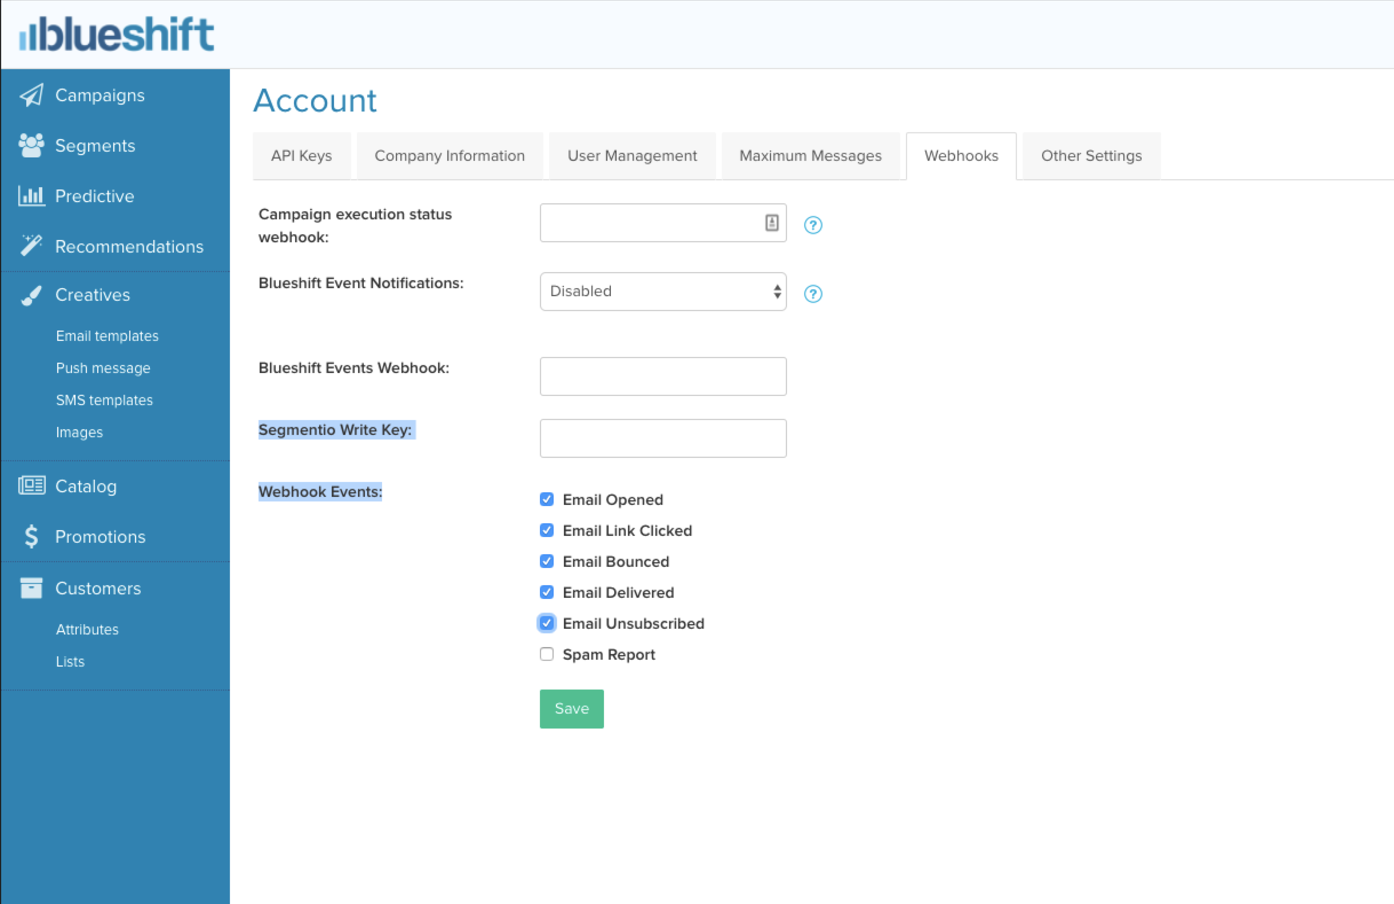 Screenshot of the Blueshift Account settings page, with the Segmentio Write Key and Webhook events highlighted.